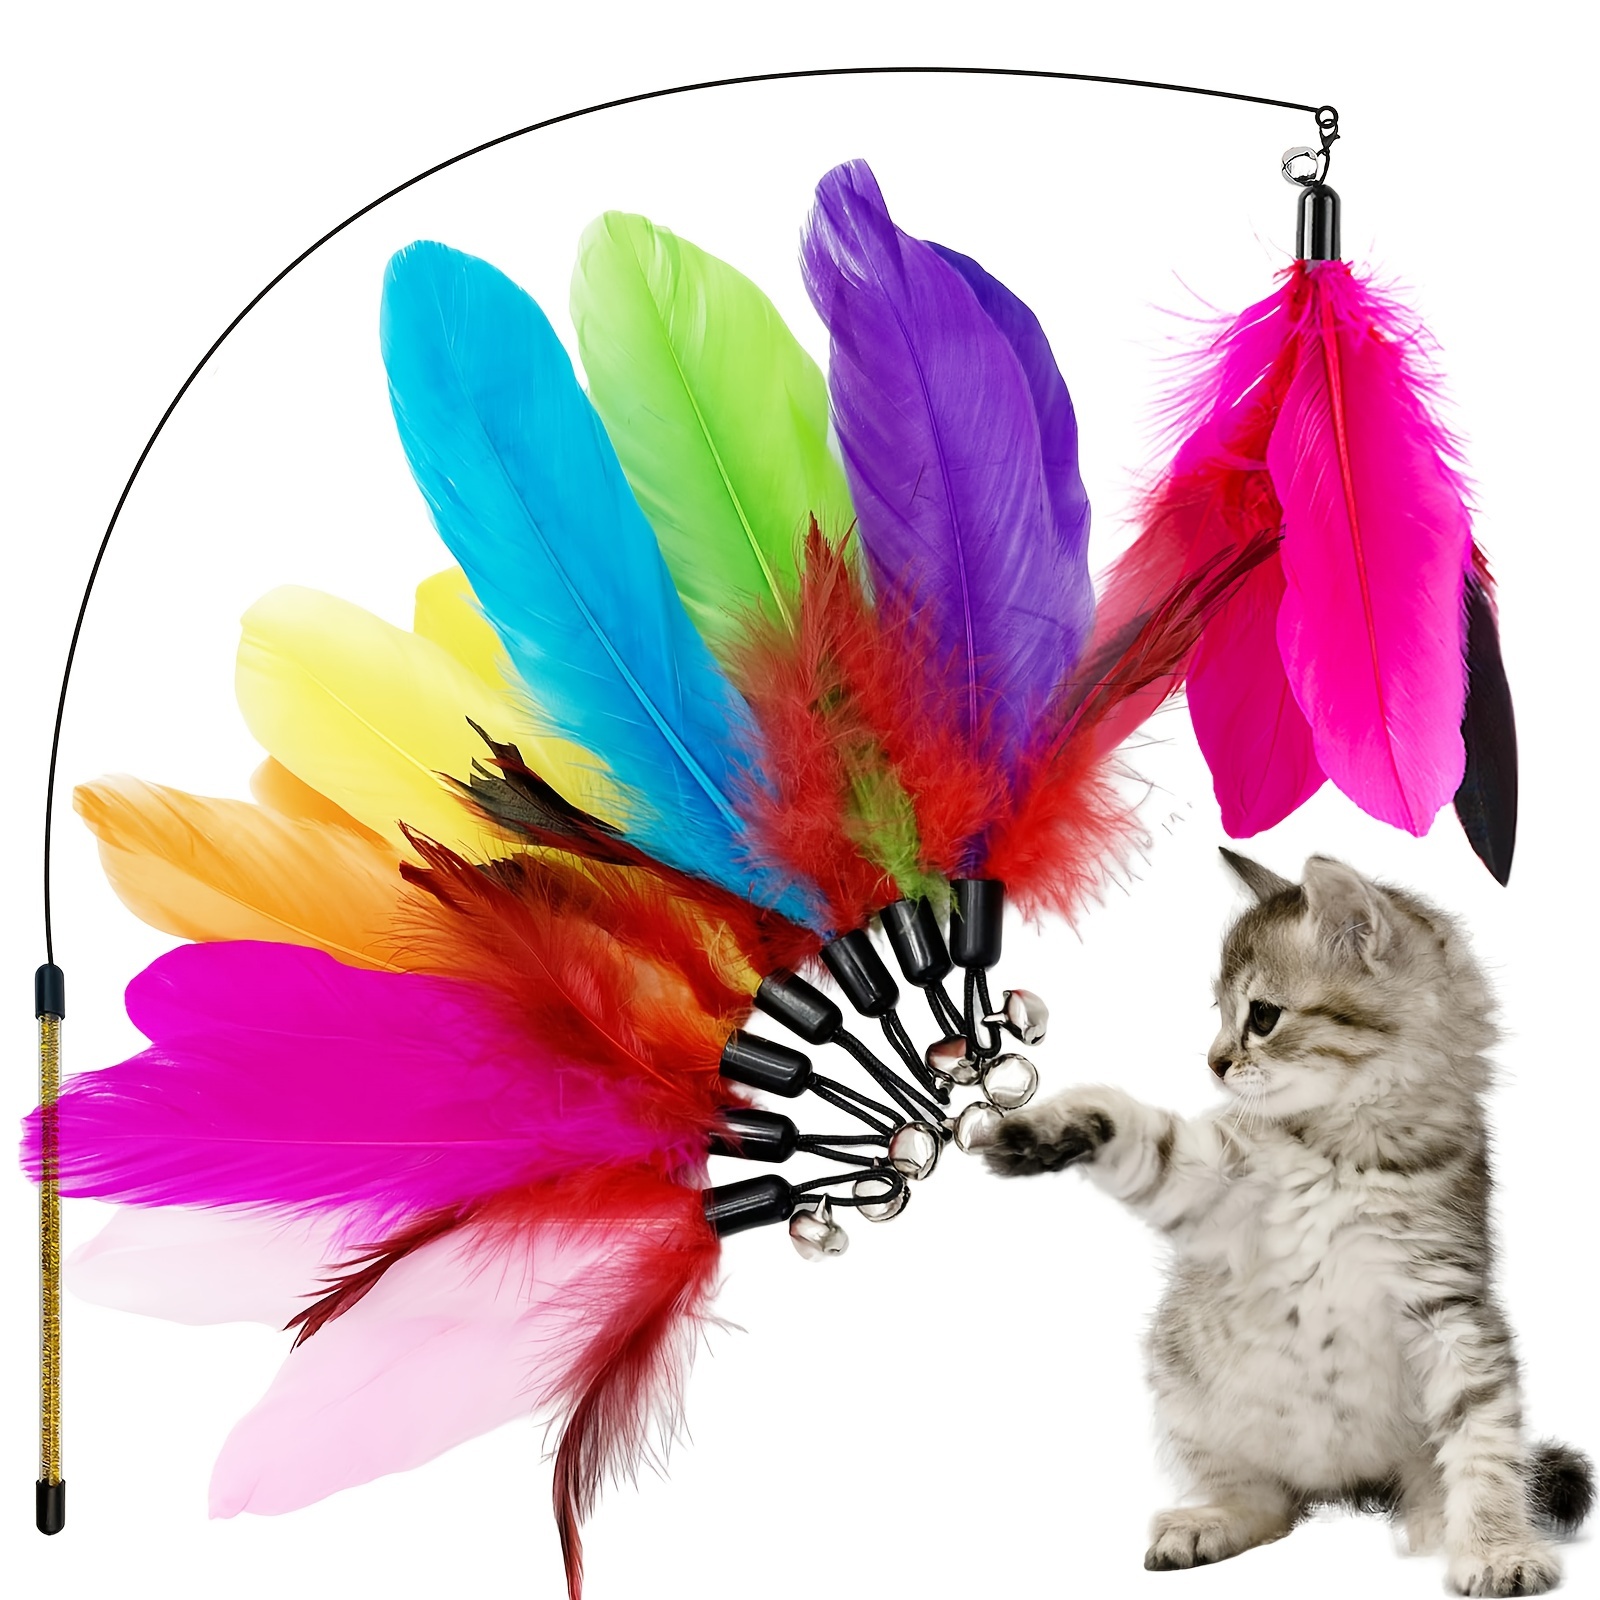 

8pcs/set Cat Feather Toys Replacement Cat Toy, Interactive Cat Wand Toy Replacement Feather With Pvc Cat Teaser Stick For Indoor Cats Supplies